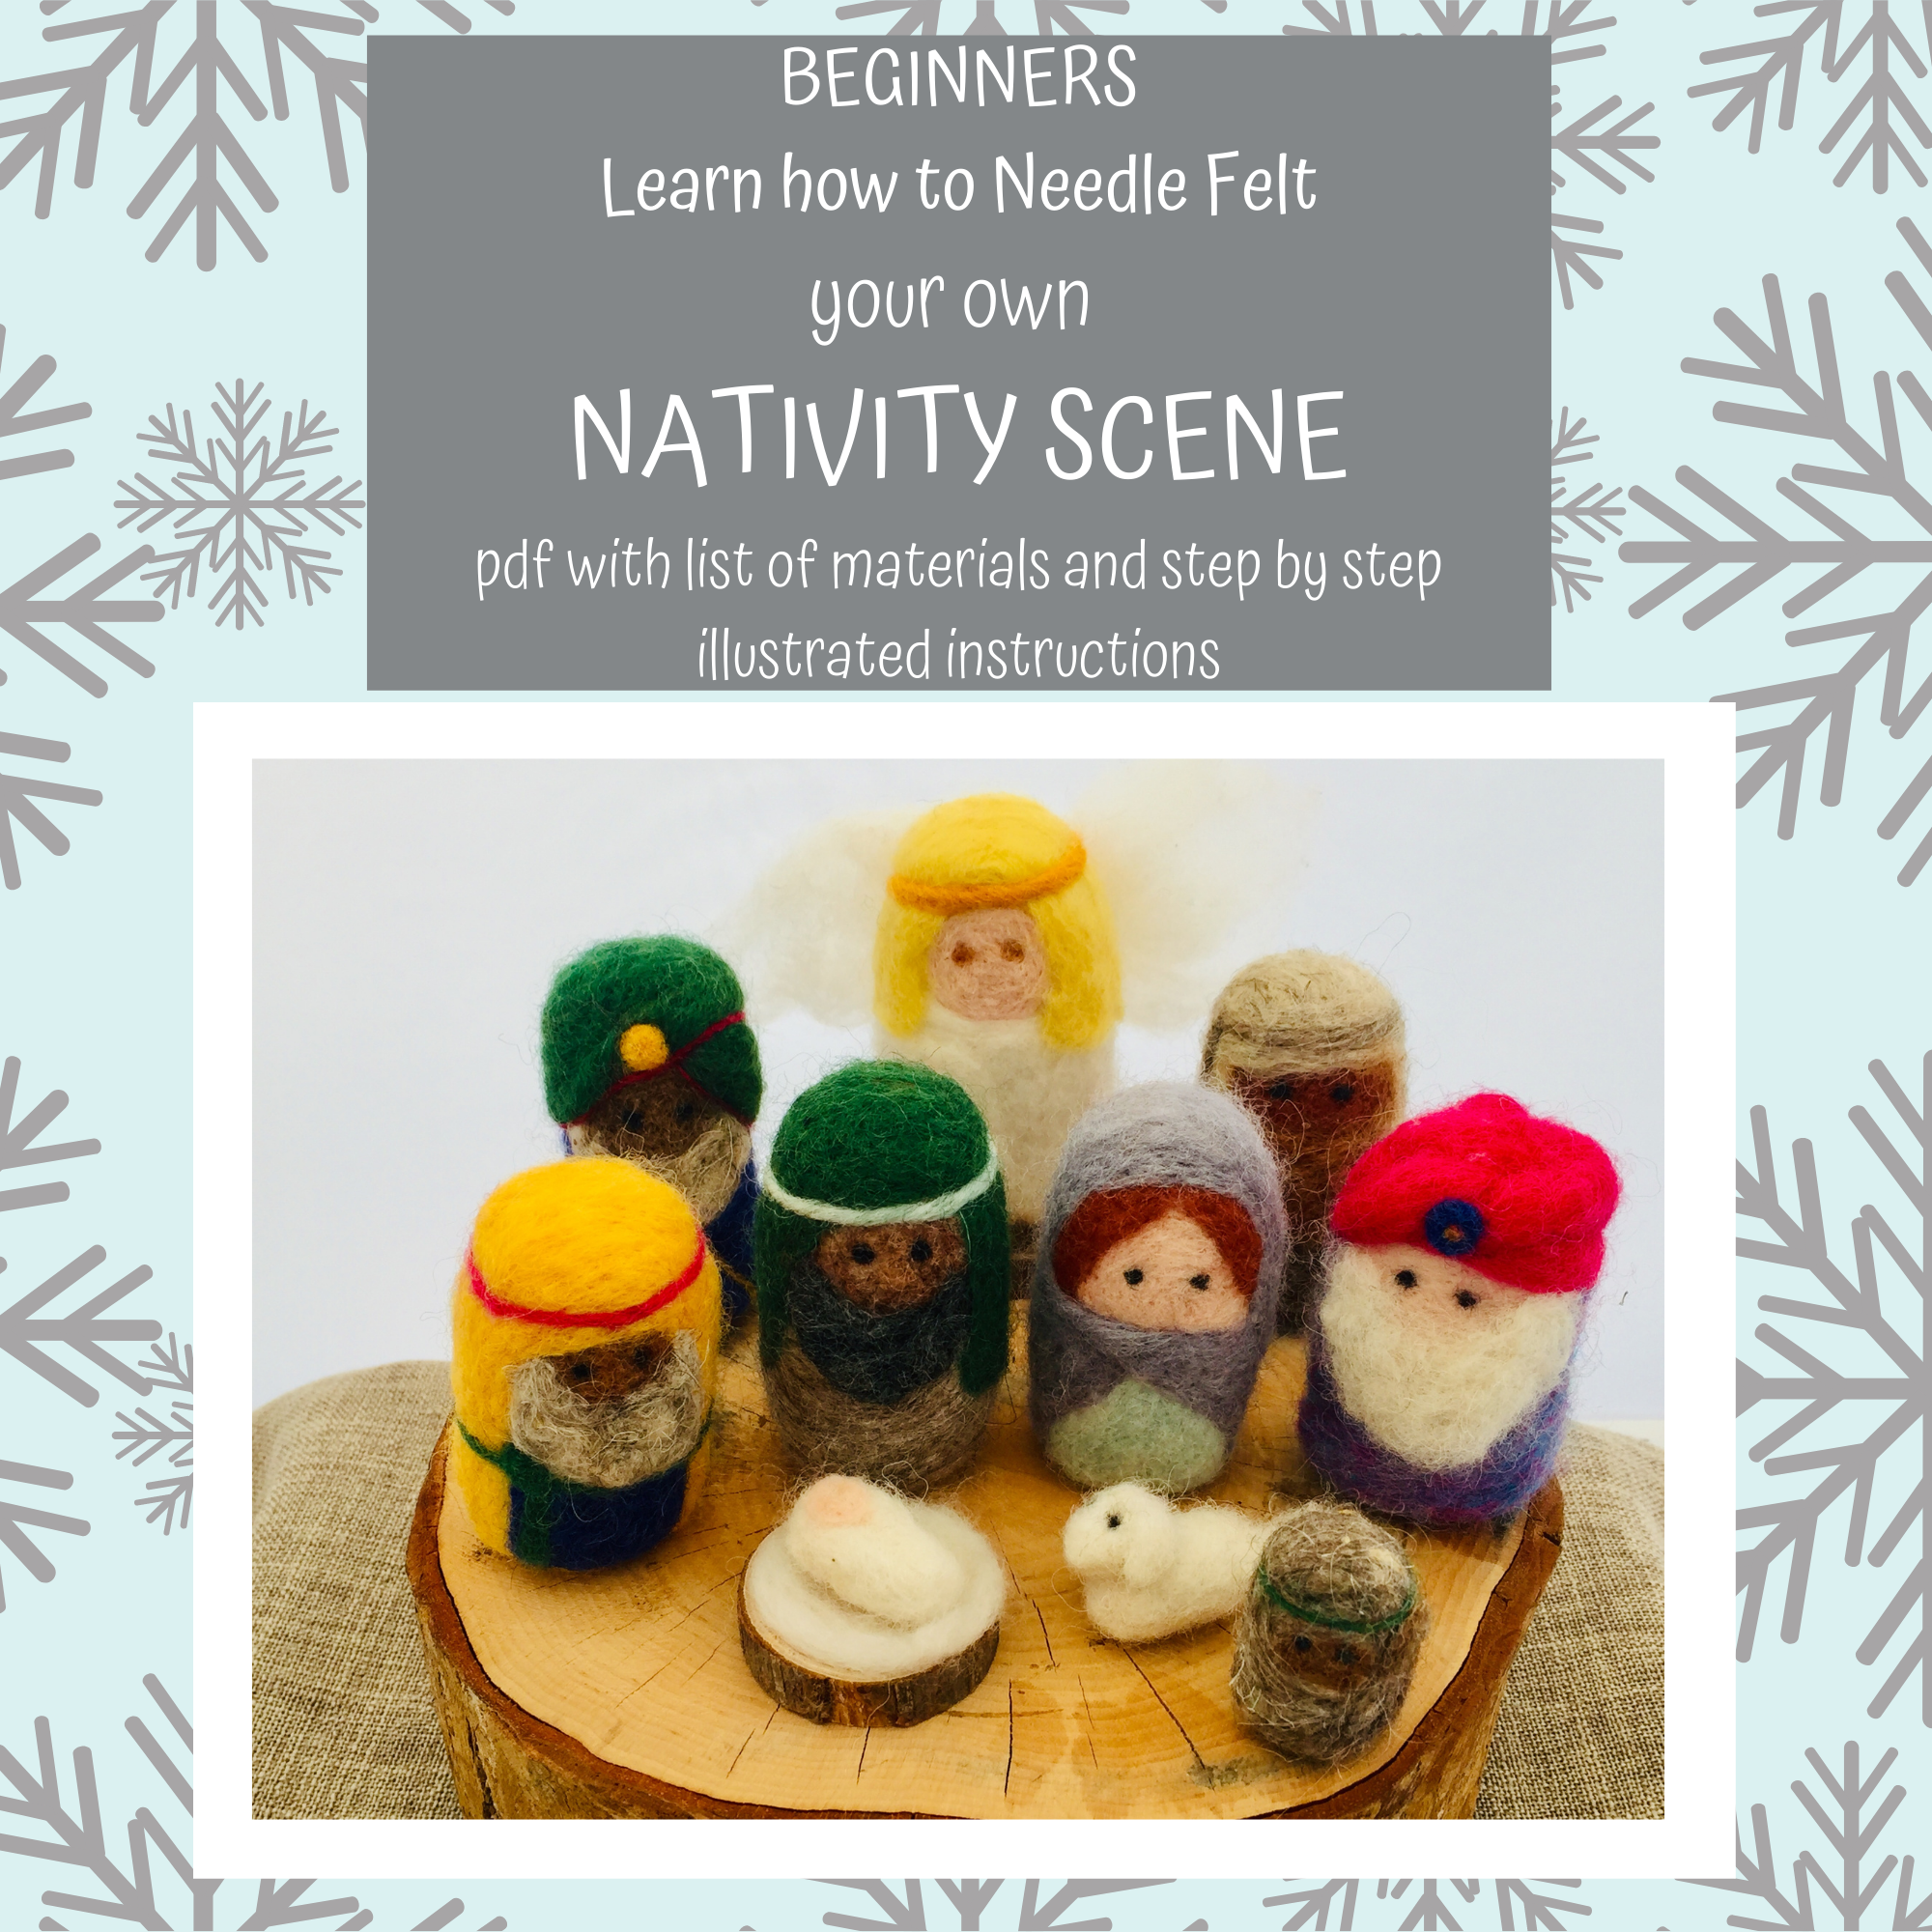 PDF Download - Instructions How to Needle Felt The Nativity Scene for Beginners plus Materials List